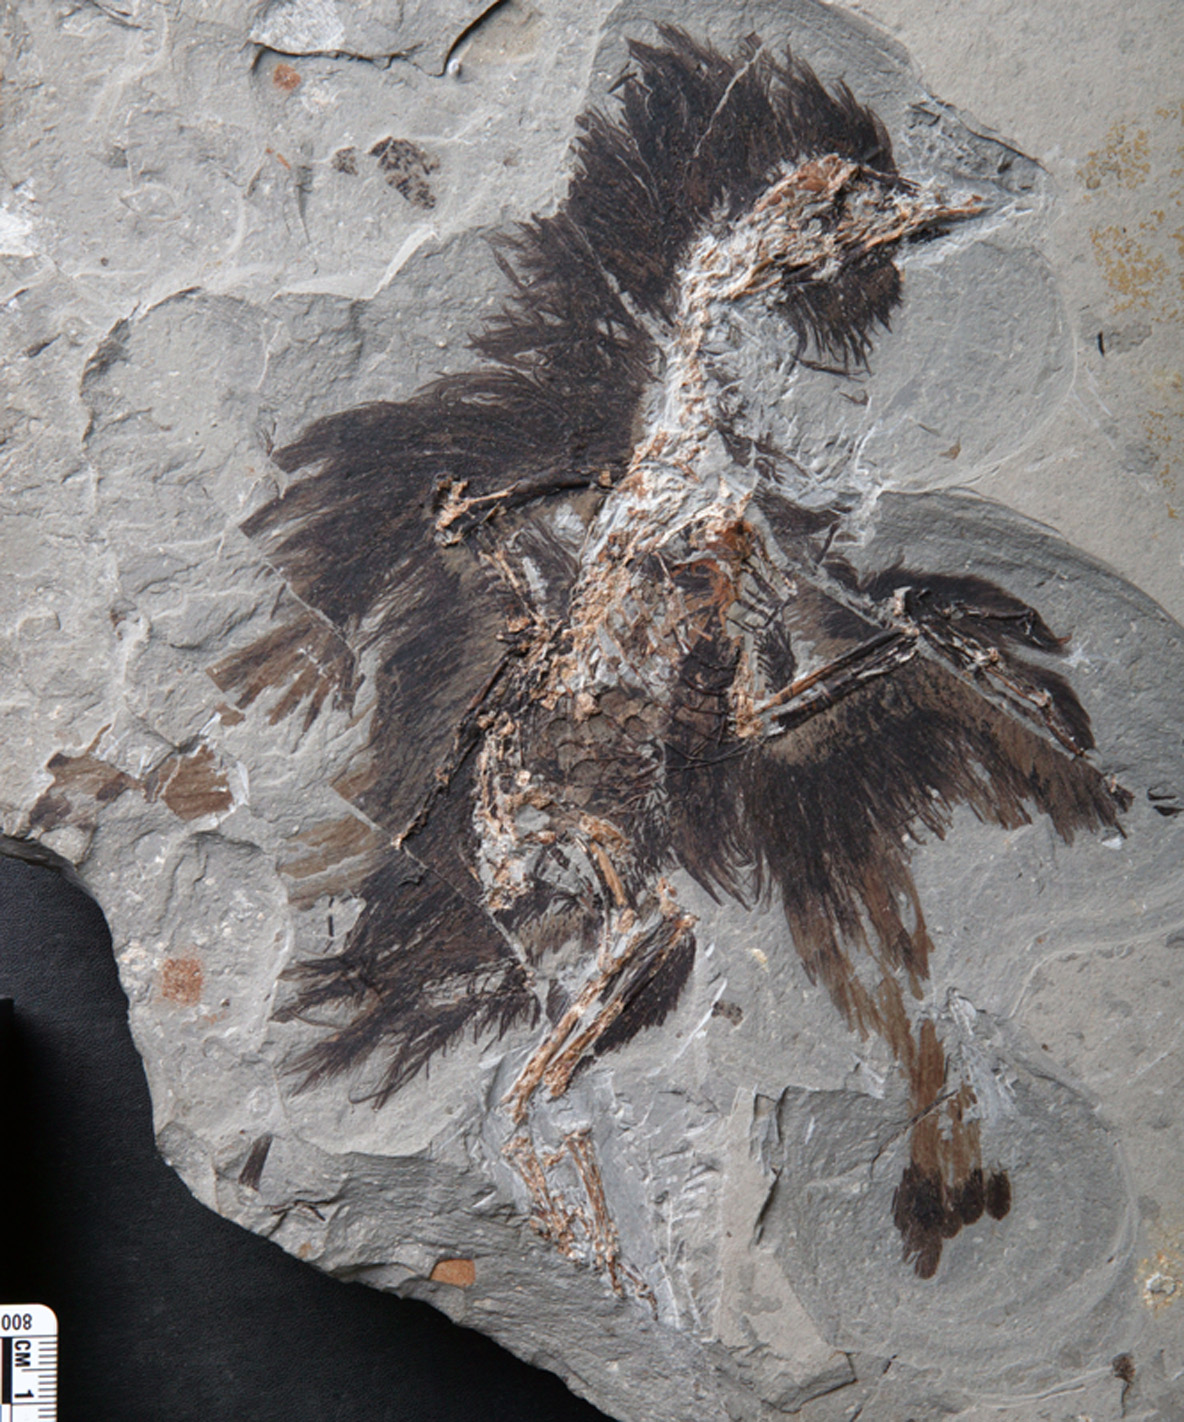 Keratin and Melanosomes Preserved in 130-Million-Year-Old Bird Fossil |  Programs and Events Calendar